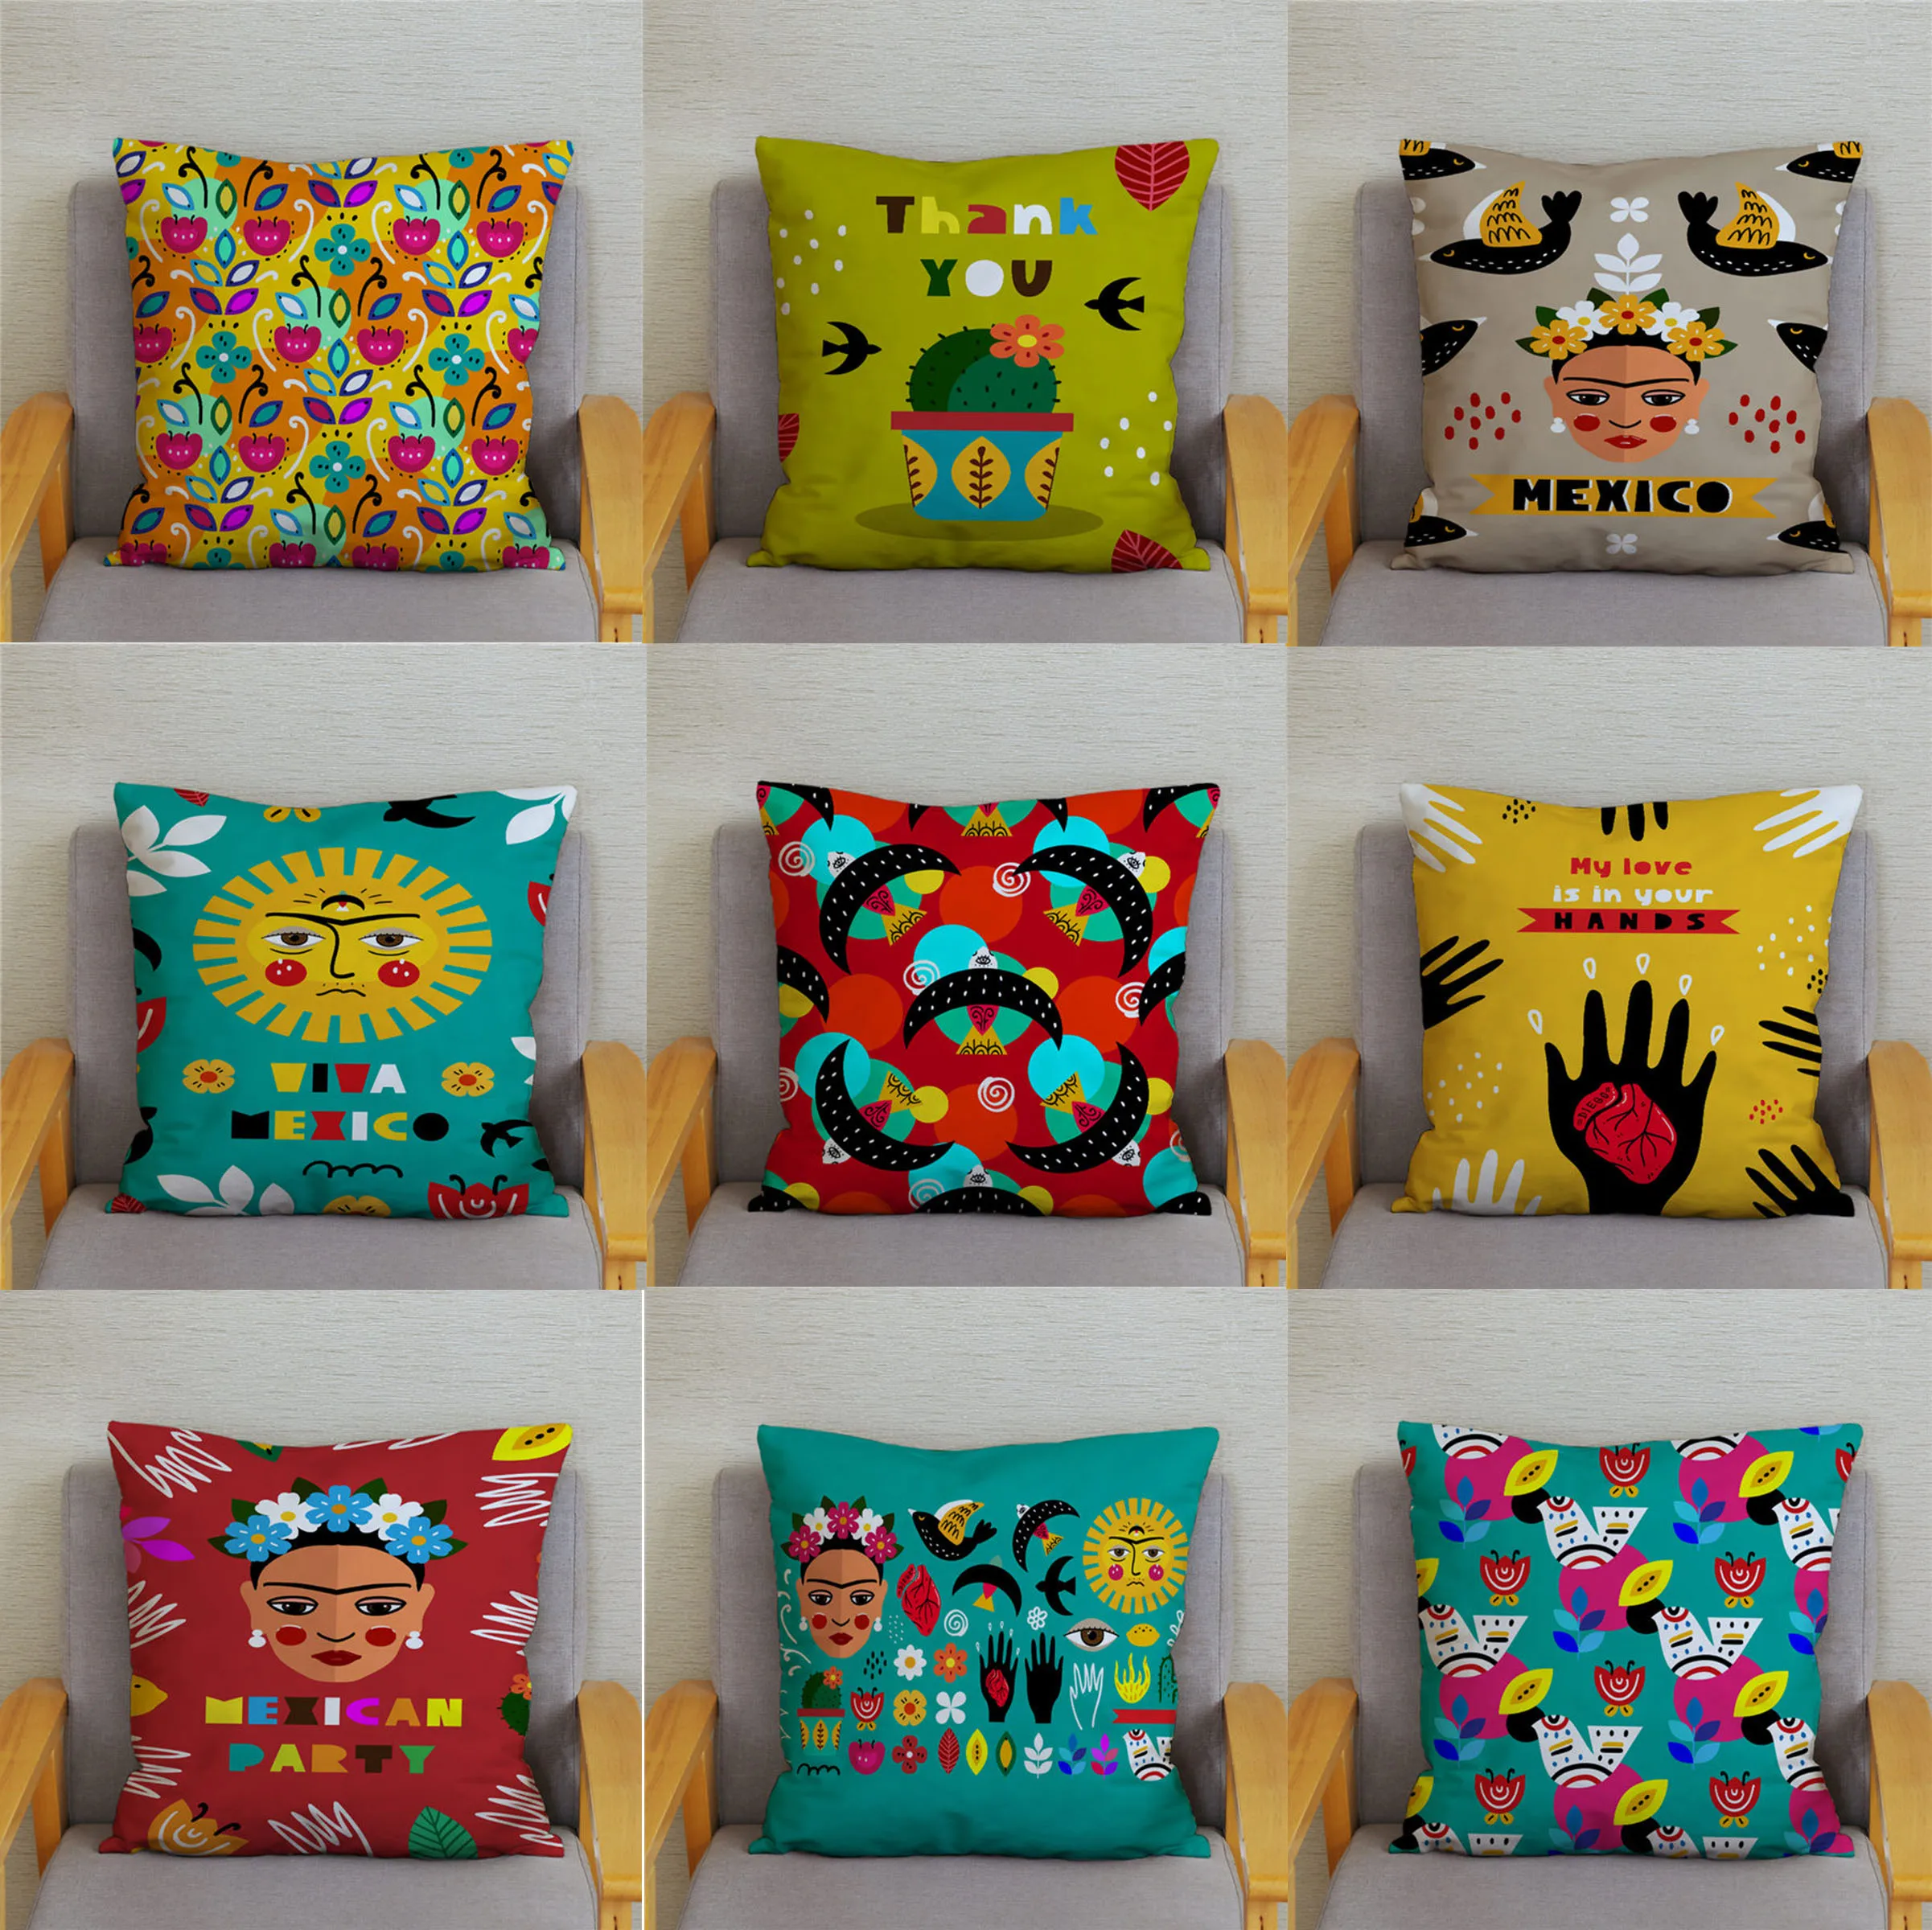 

45x45cm Mexican National Style Polyester Printing Pillowcase Cushion Cover Hold Pillowcase Home Decoration Cushion Pillowcase